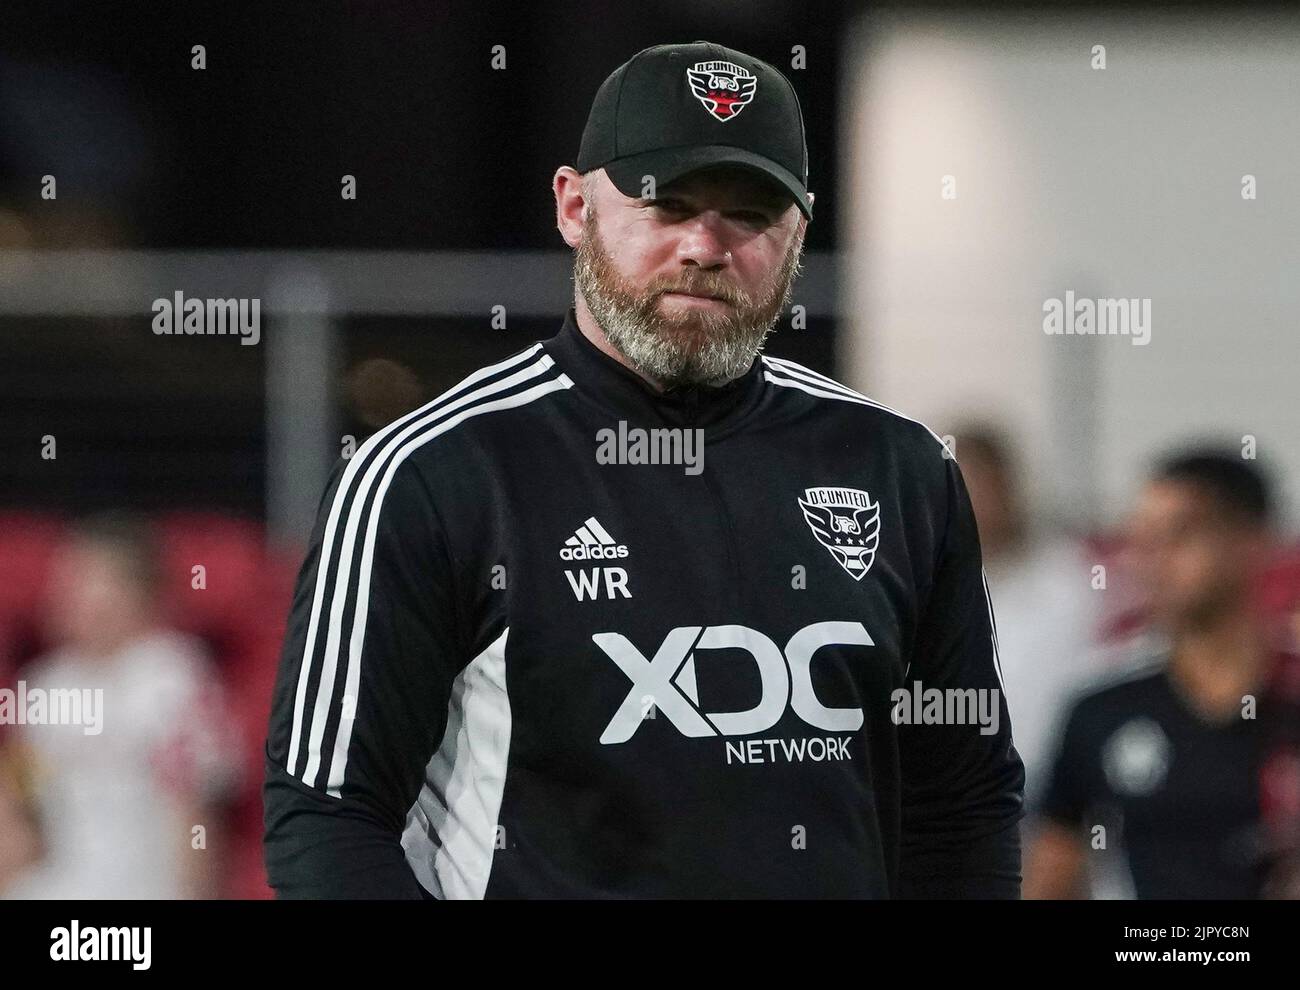 WASHINGTON, DC, USA - 20 AUGUST 2022: DC United coach Wayne Rooney leaves the pitch after his team lost 6-0 during a MLS match between D.C United and the Philadelphia Union on August 20, 2022, at Audi Field, in Washington, DC. (Photo by Tony Quinn-Alamy Live News) Stock Photo